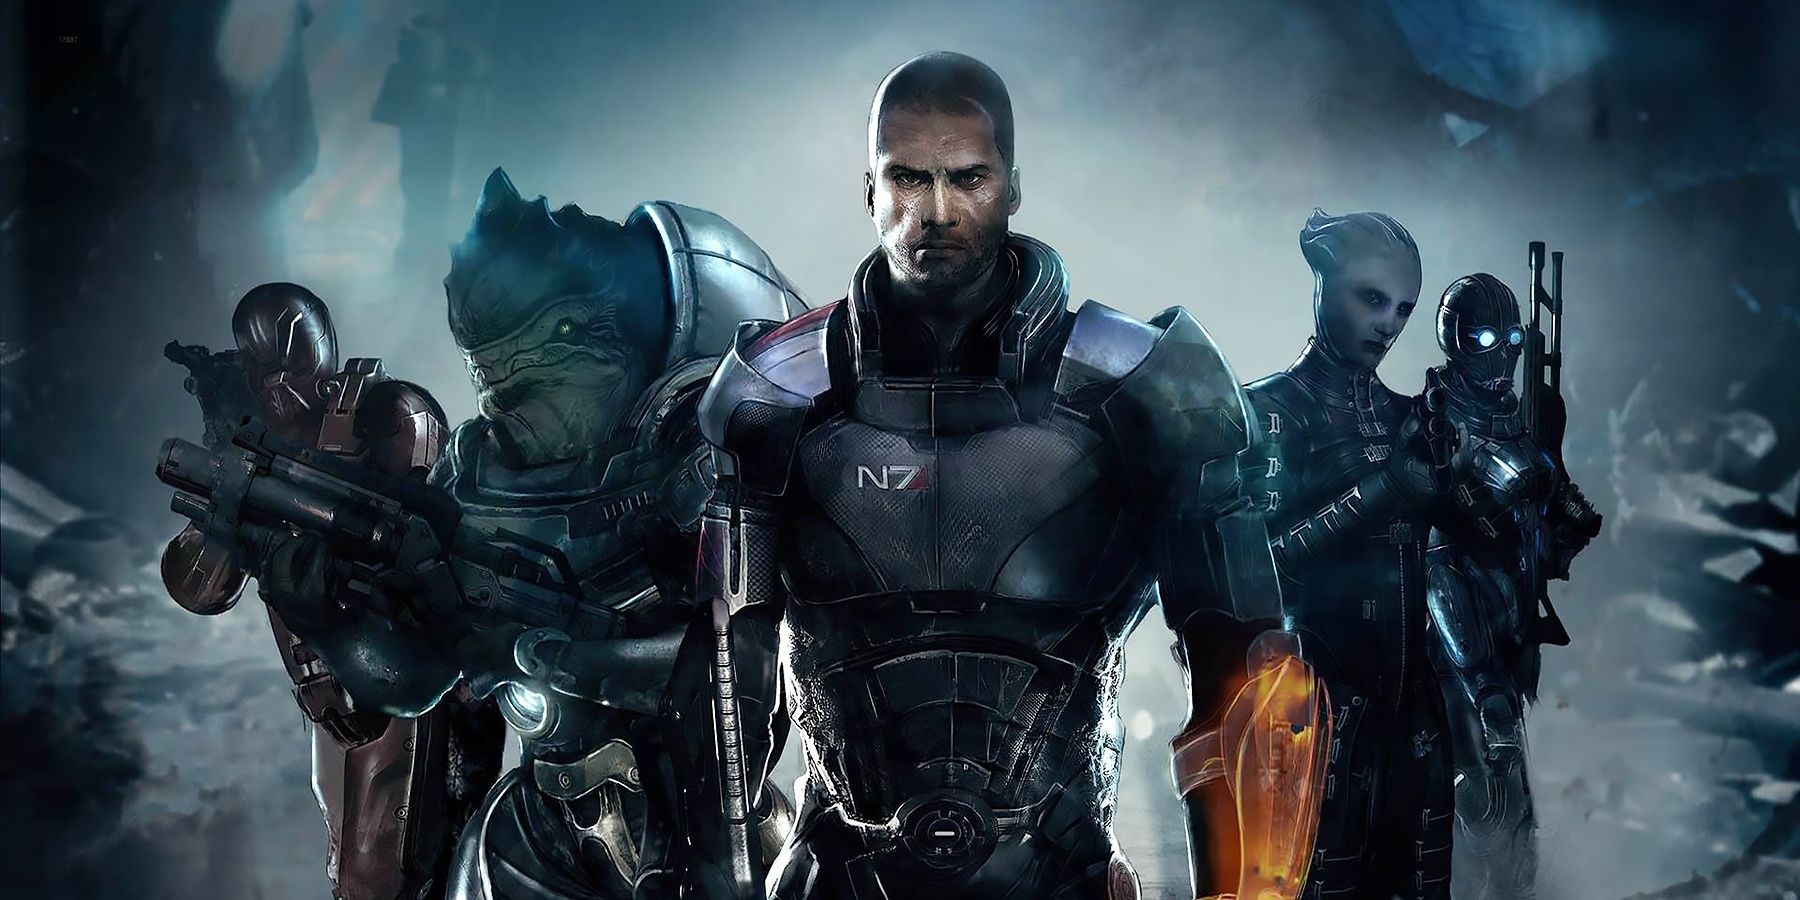 Commander Shepard and team from Mass Effect